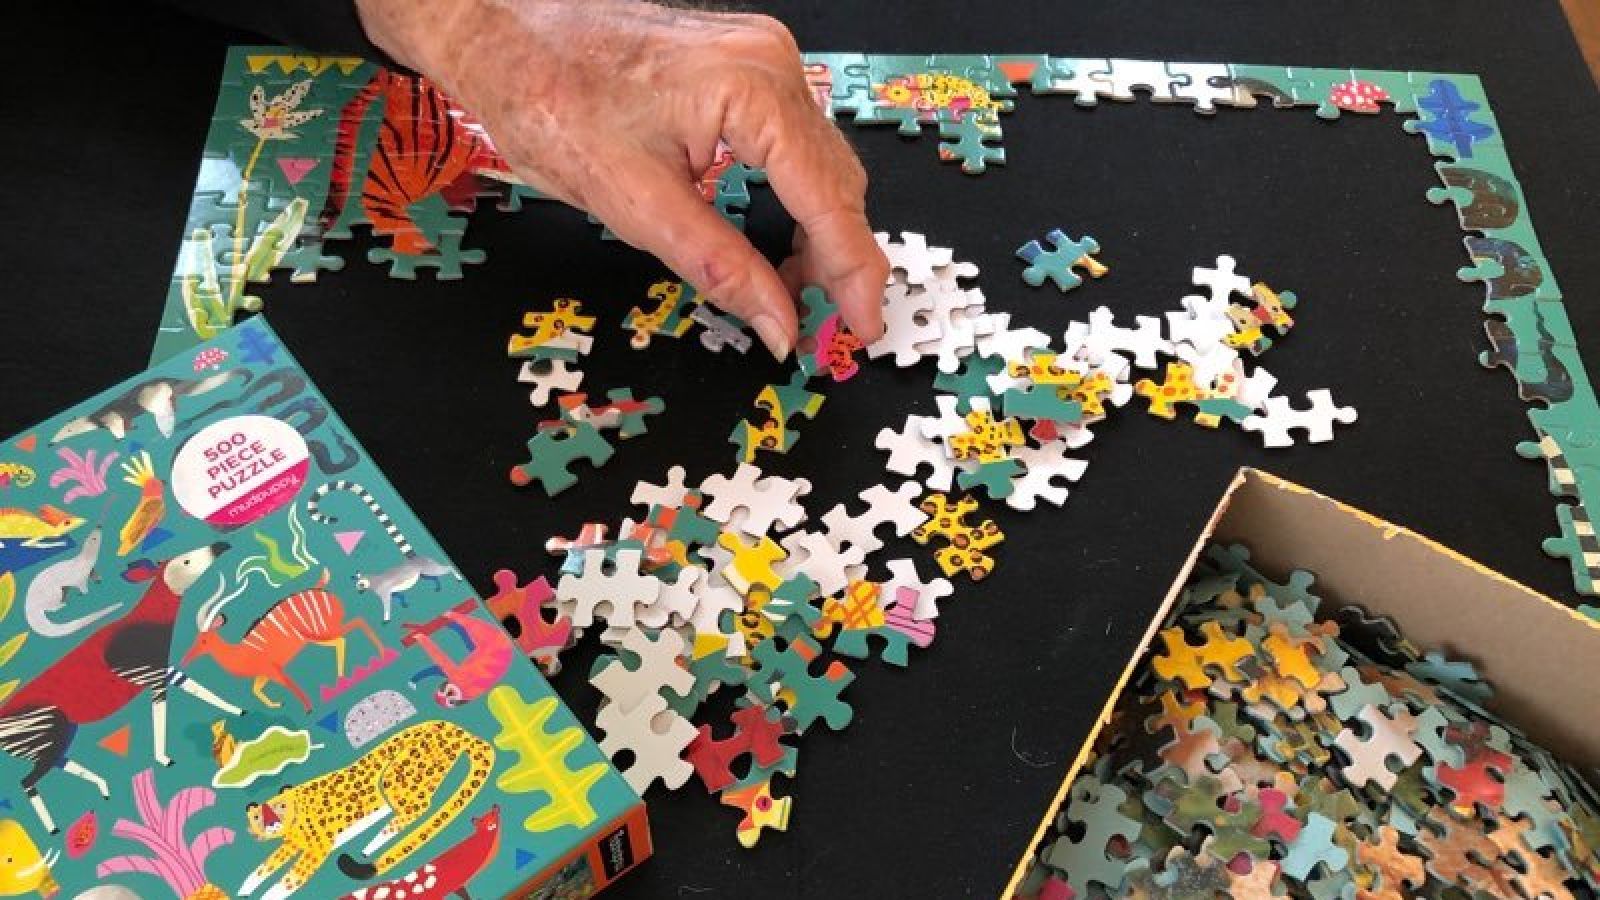 Puzzles are the analog way people are curbing their stay-at-home